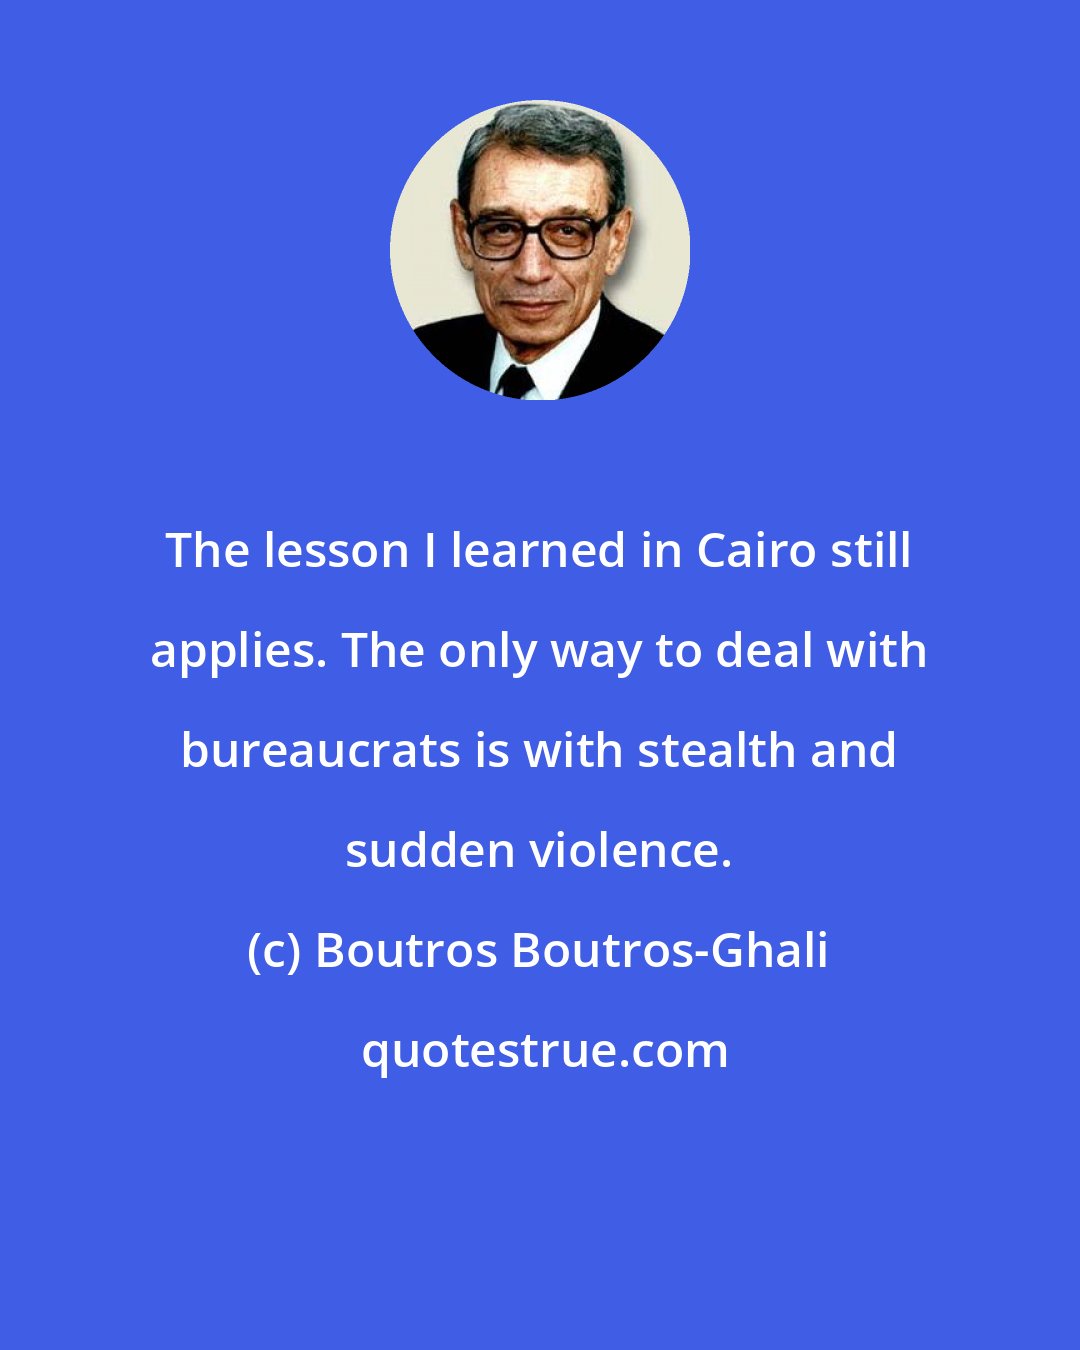 Boutros Boutros-Ghali: The lesson I learned in Cairo still applies. The only way to deal with bureaucrats is with stealth and sudden violence.